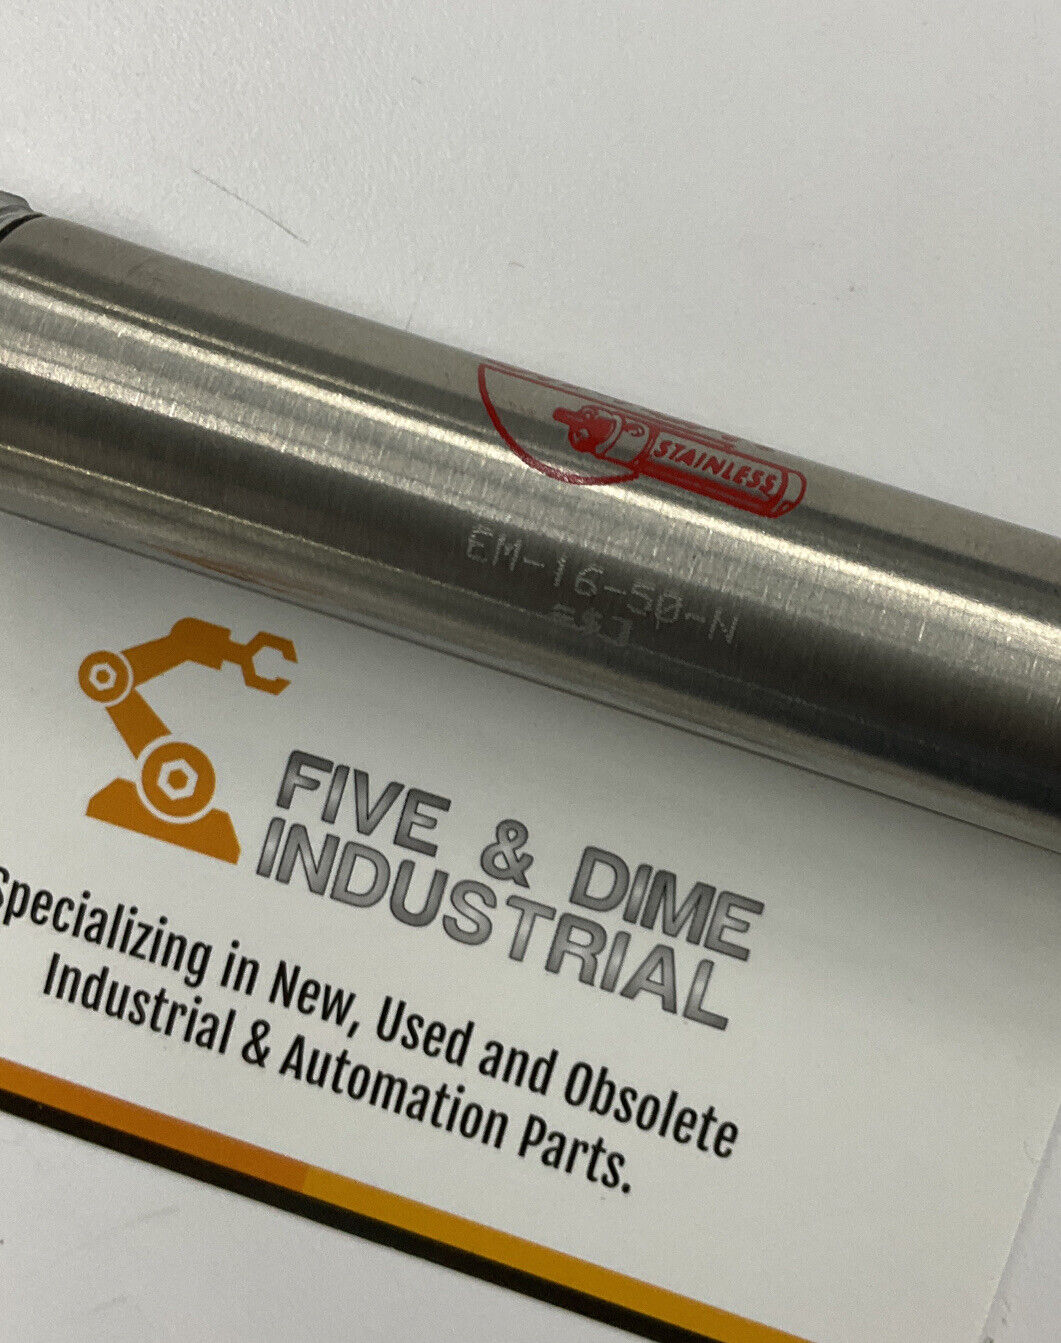 Bimba EM-16-50-N New Stainless Pneumatic Cylinder (CL116) - 0